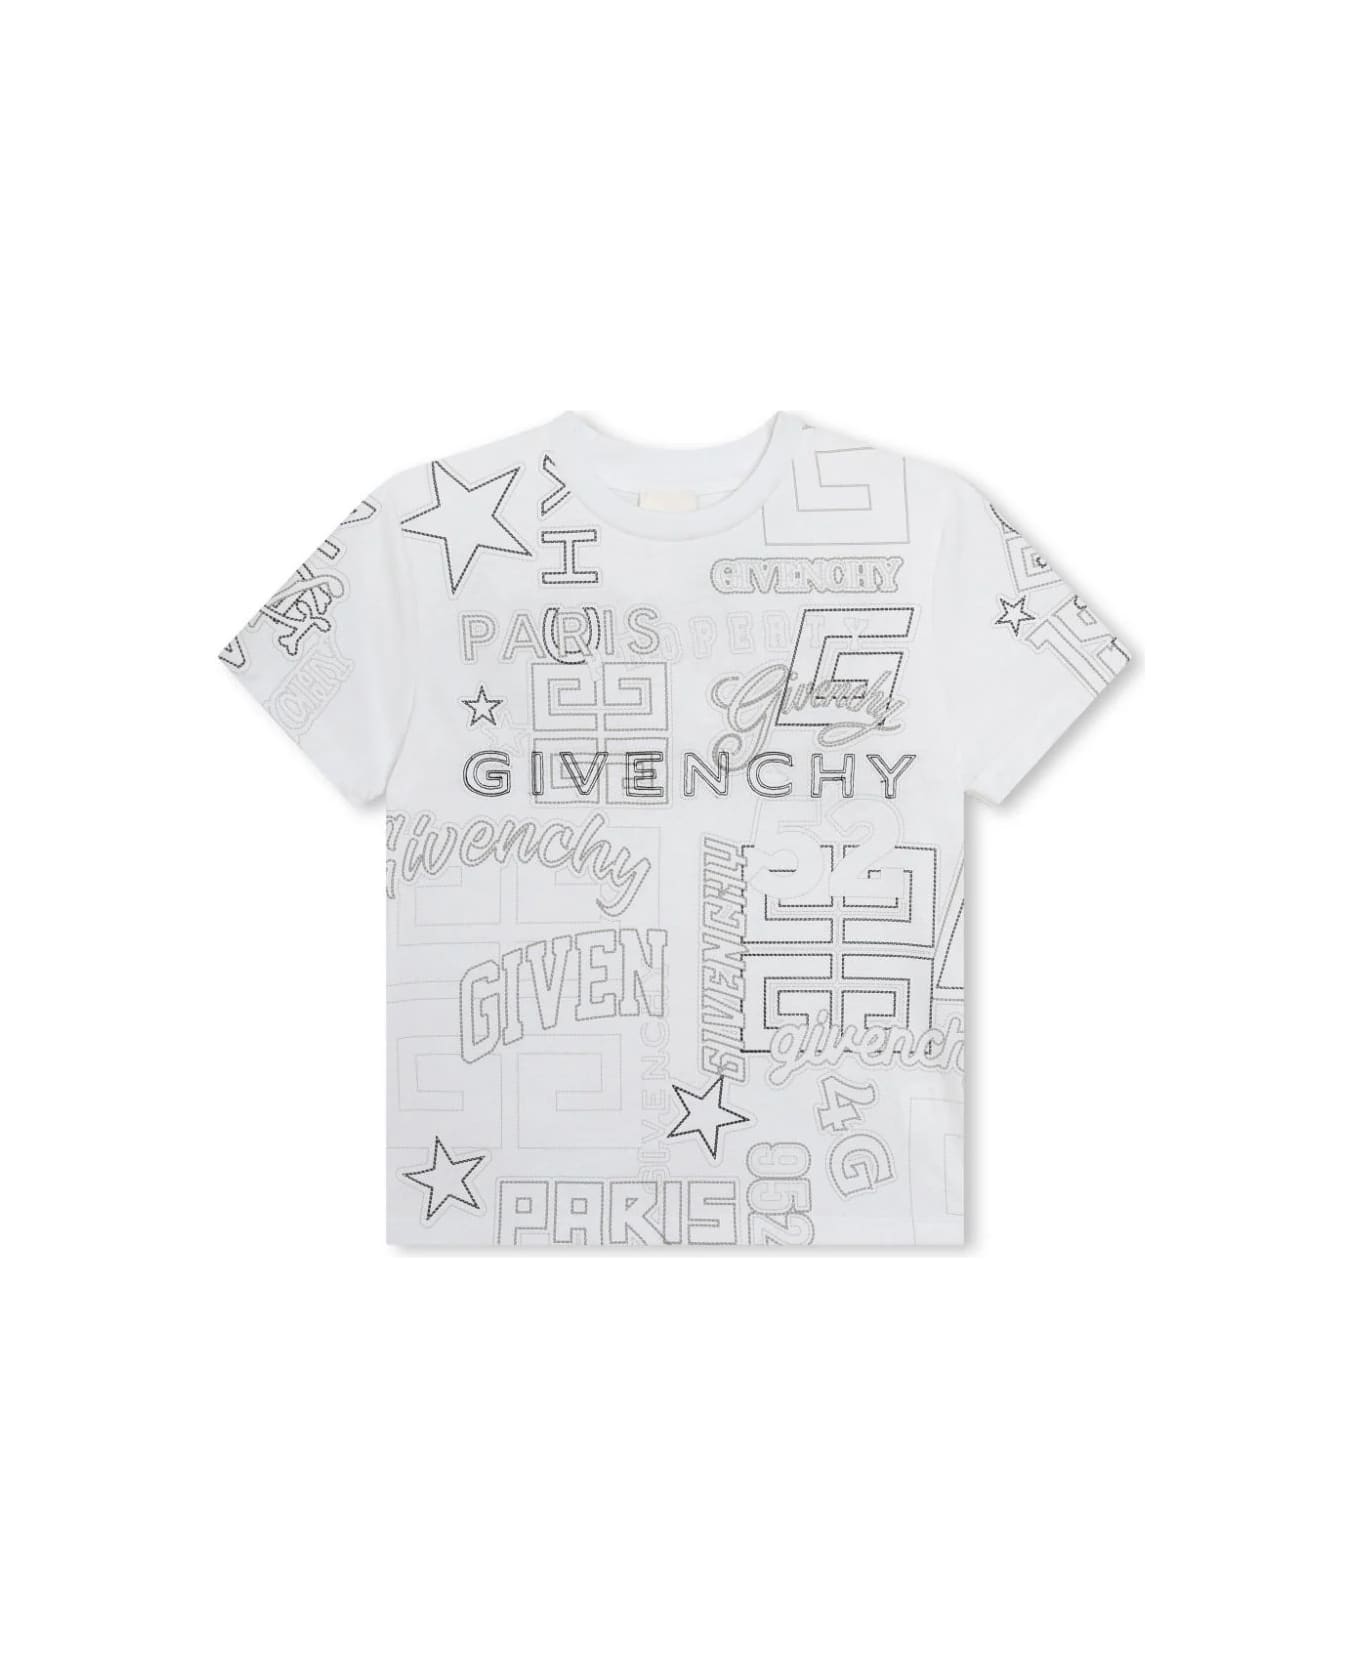 Givenchy White T-shirt With All-over Print - White